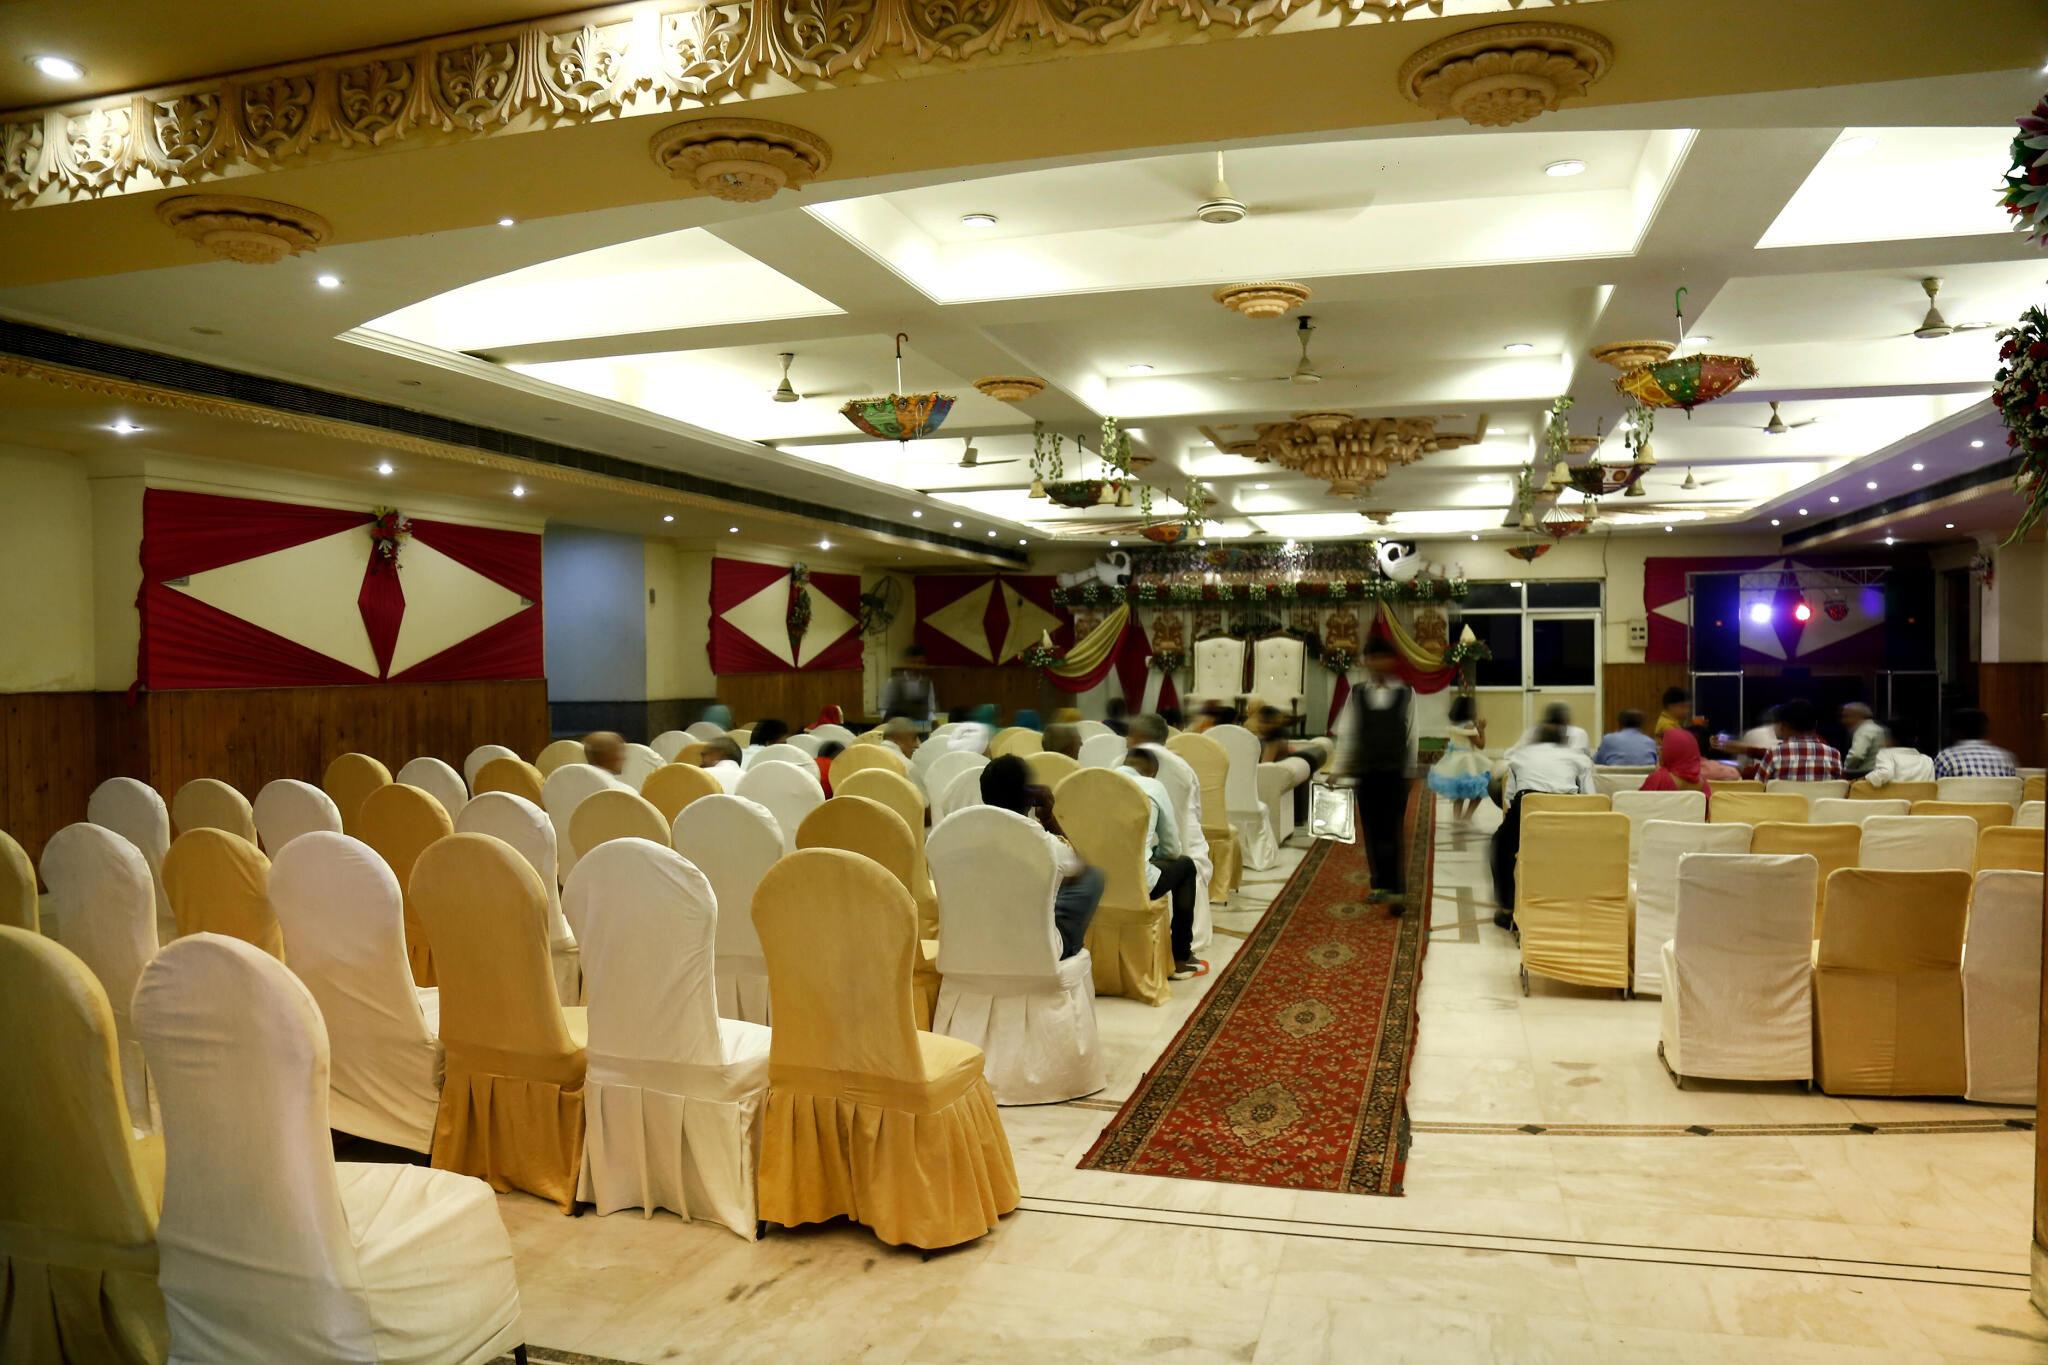  Best Wedding Banquet hall in Patna for Marriage pics